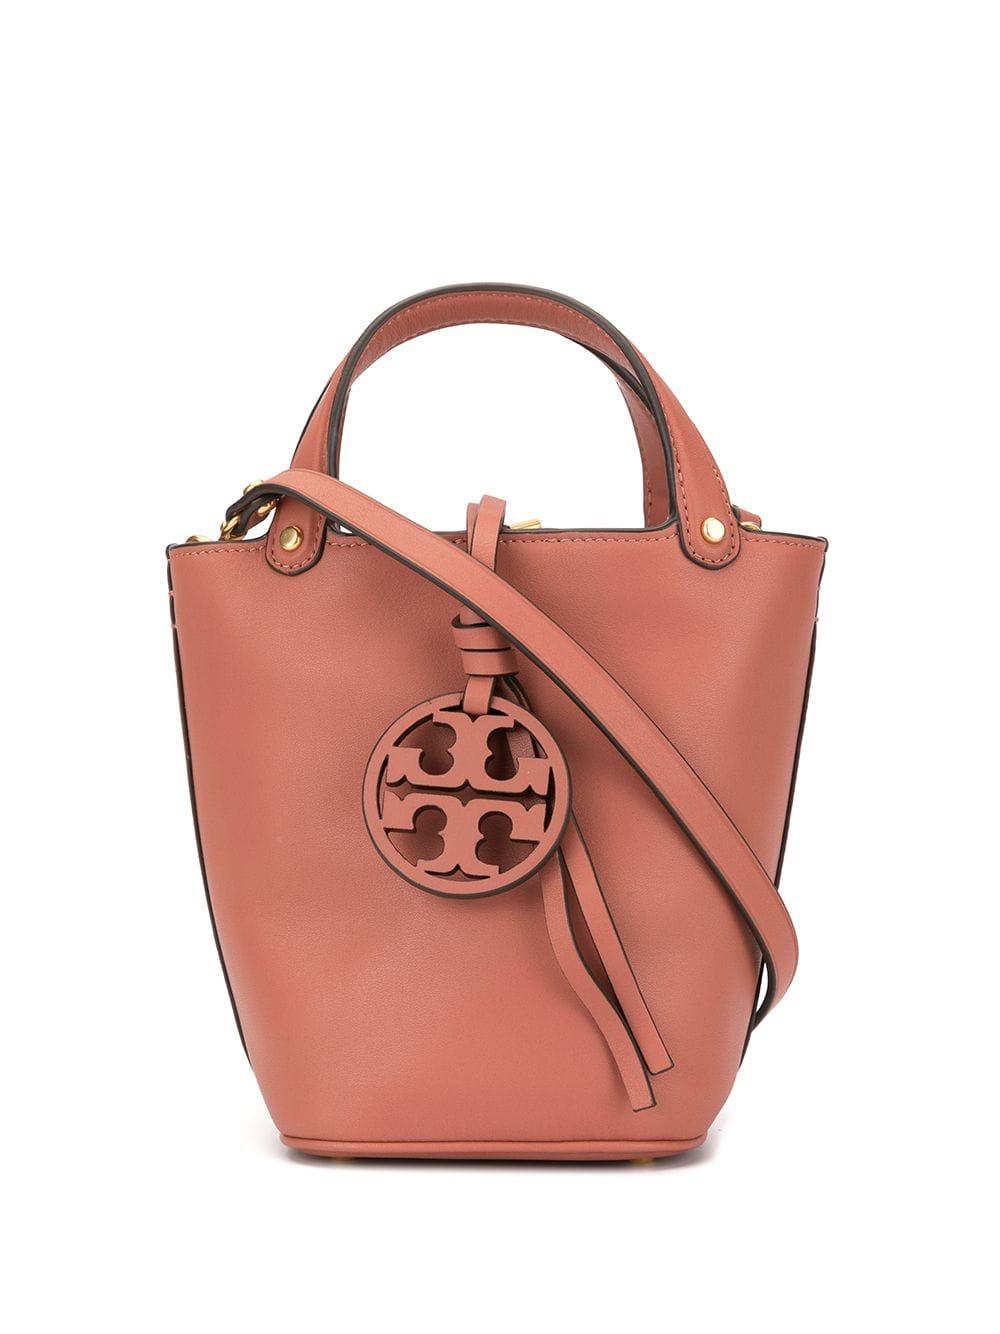 Tory Burch Small Miller Bucket Bag in Pink